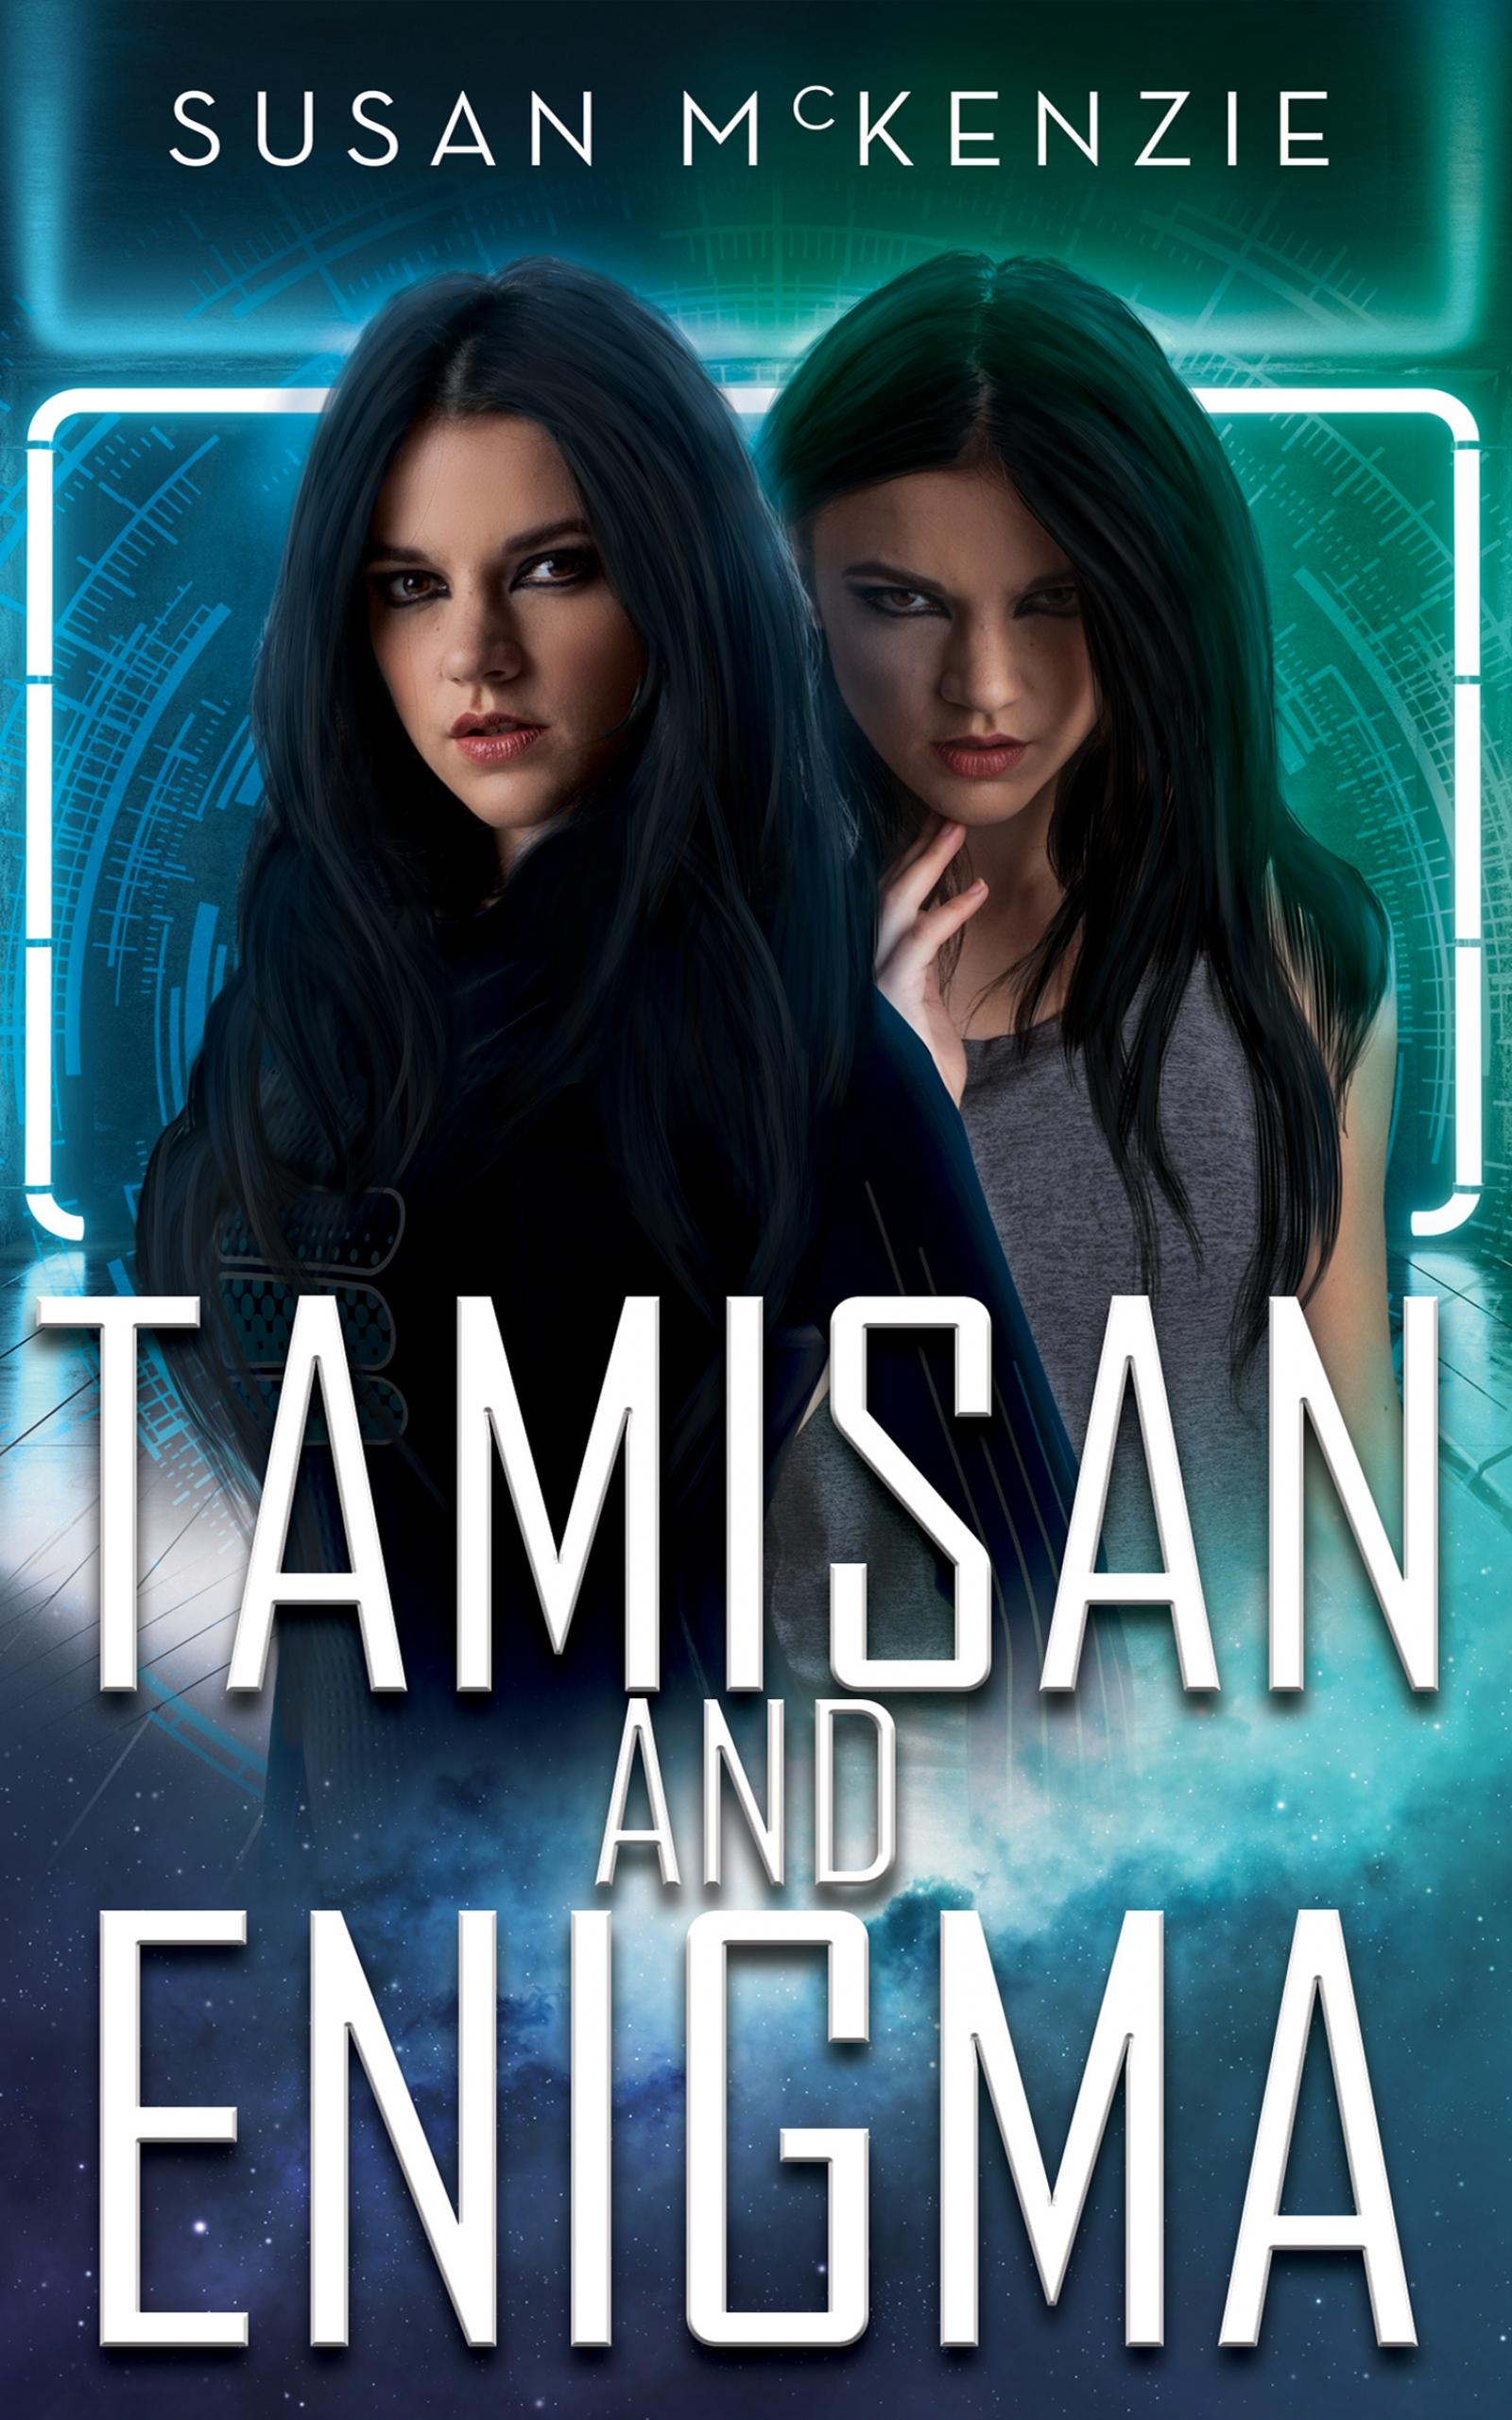 Tamisan and Enigma Box Set